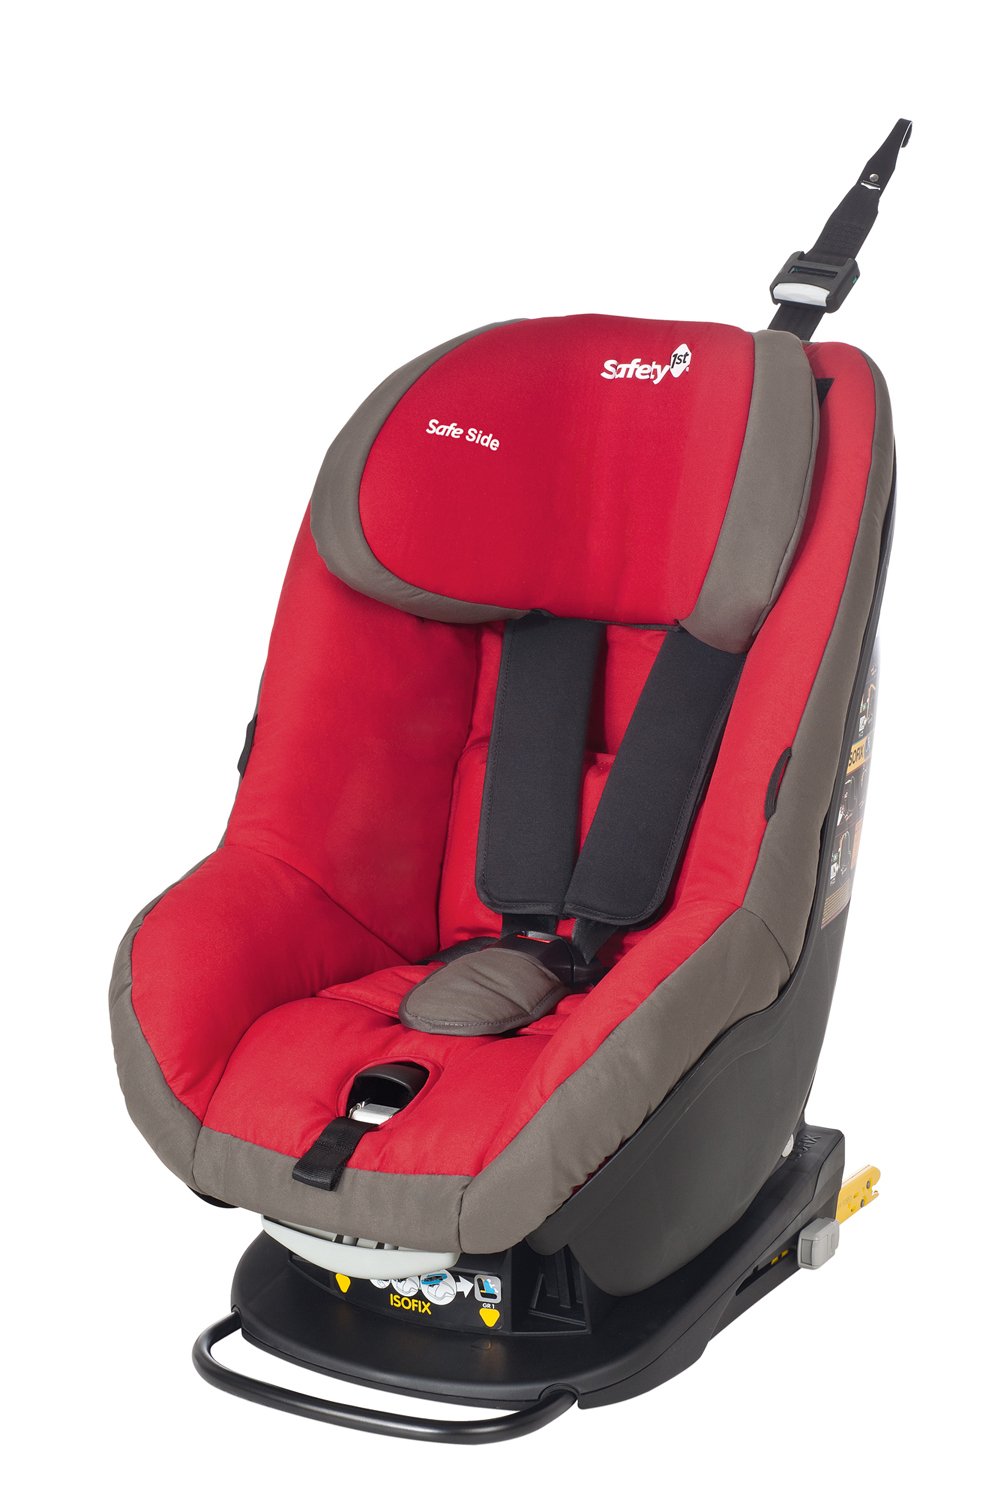 Safety 1st (SAQL5) Safety 1st PrimeoFix Child Car Seat Group 0 +/1 for Backward-Facing Journeys from Birth to 18 Kg) Red Mania